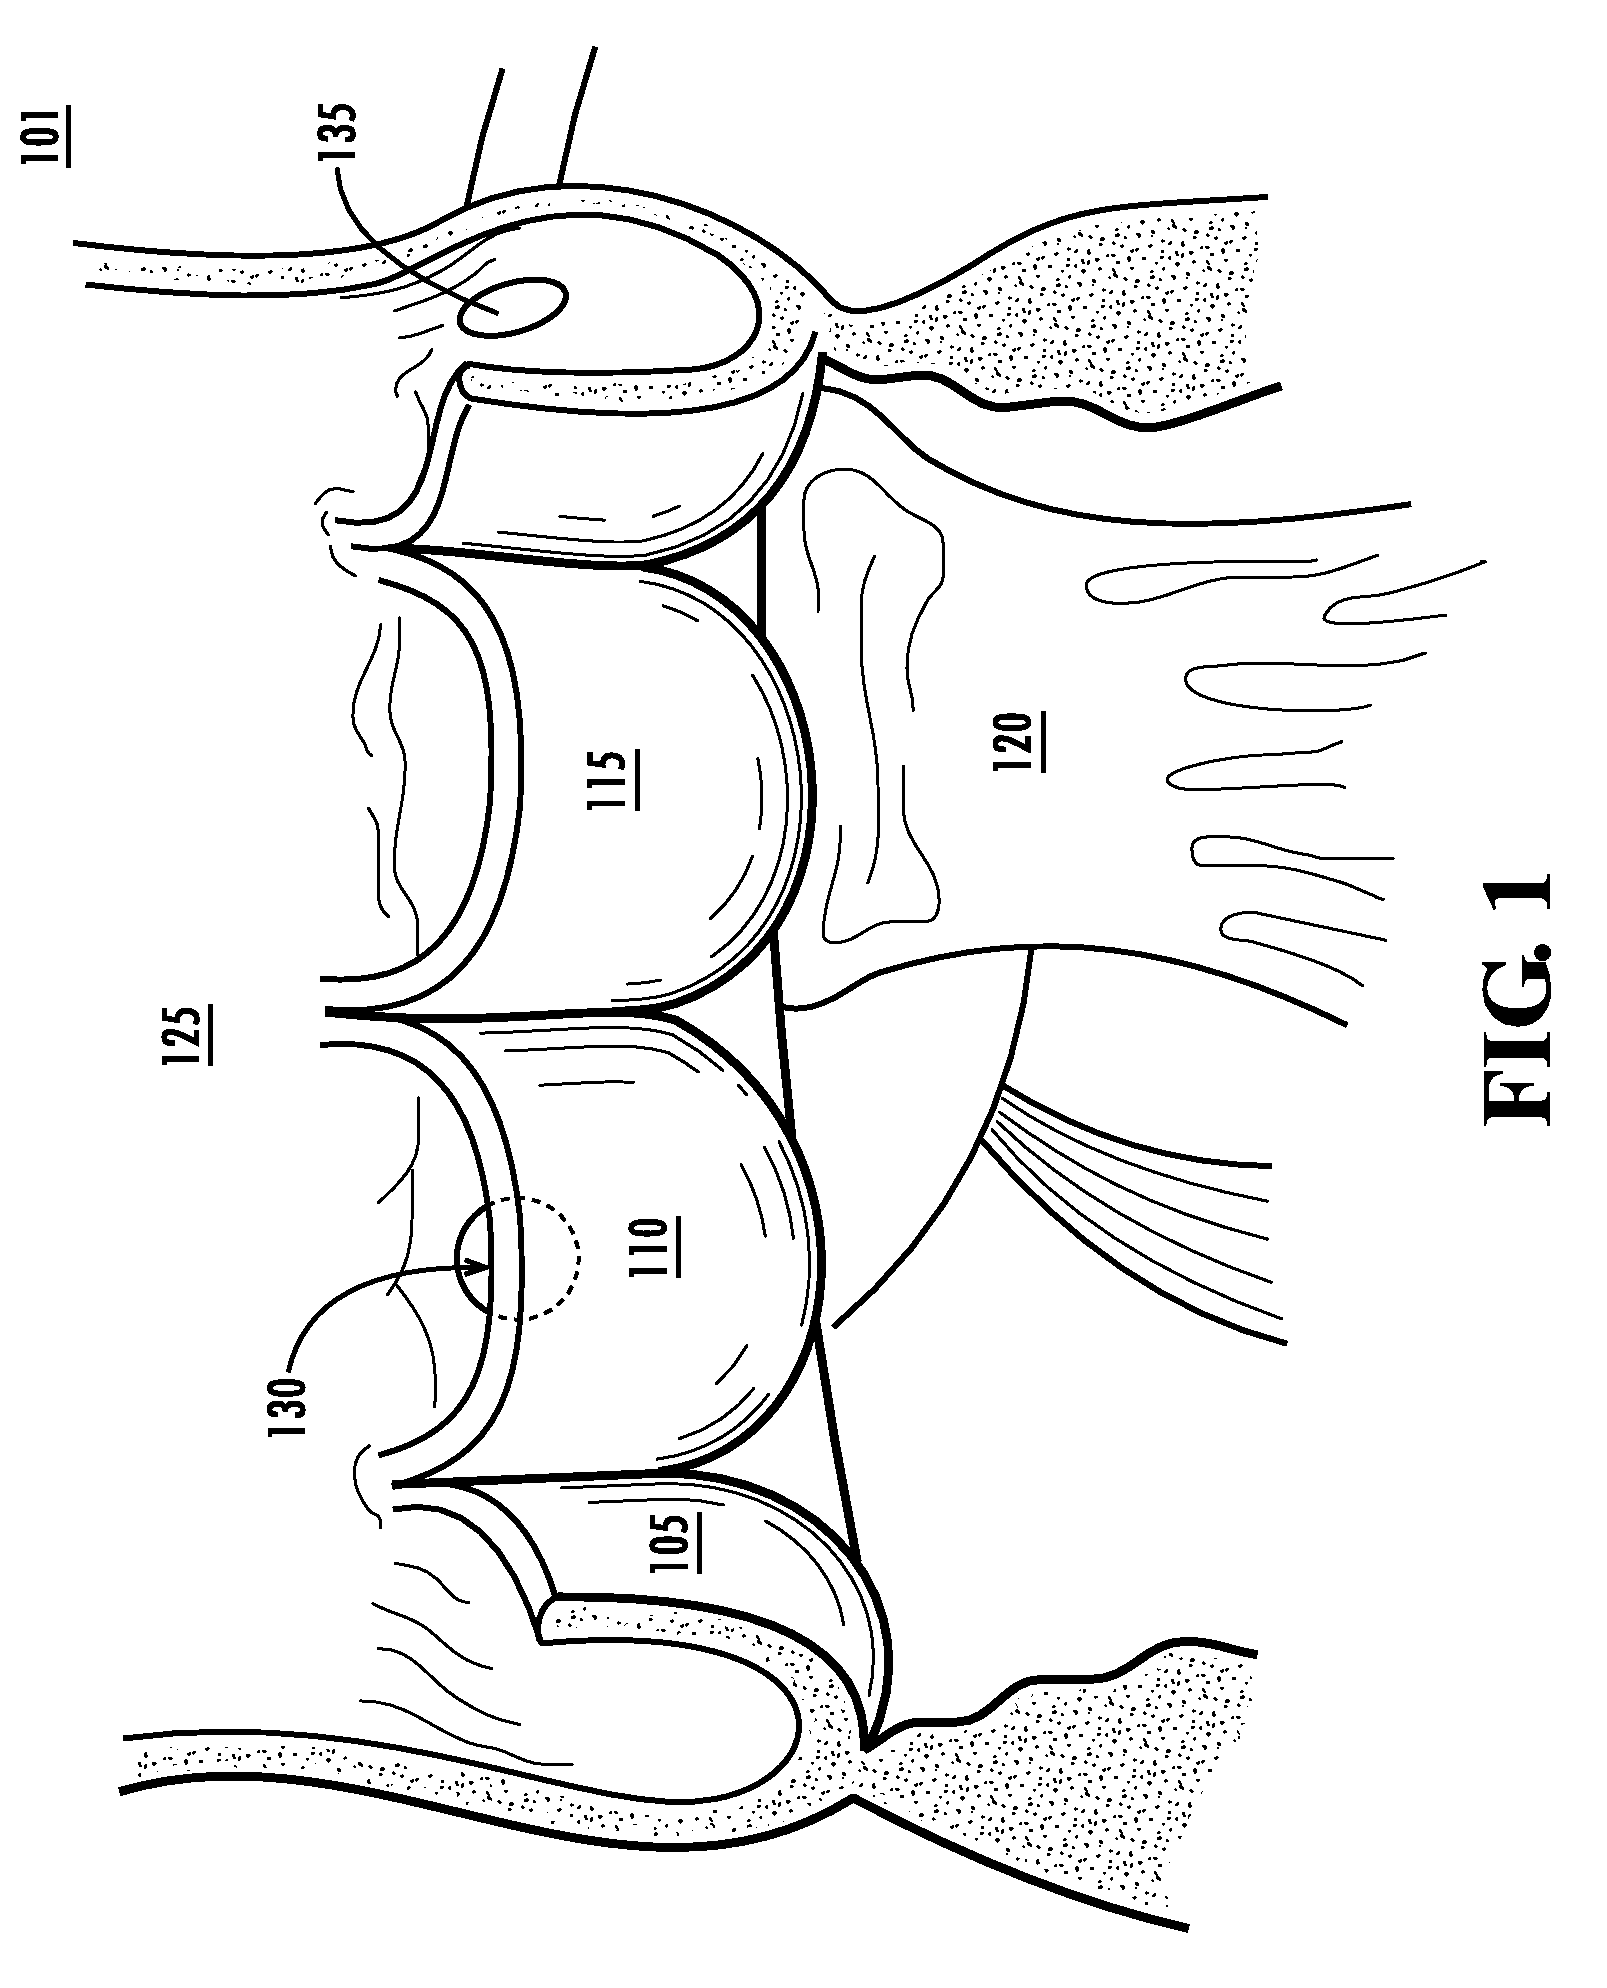 Systems and methods for enabling heart valve replacement